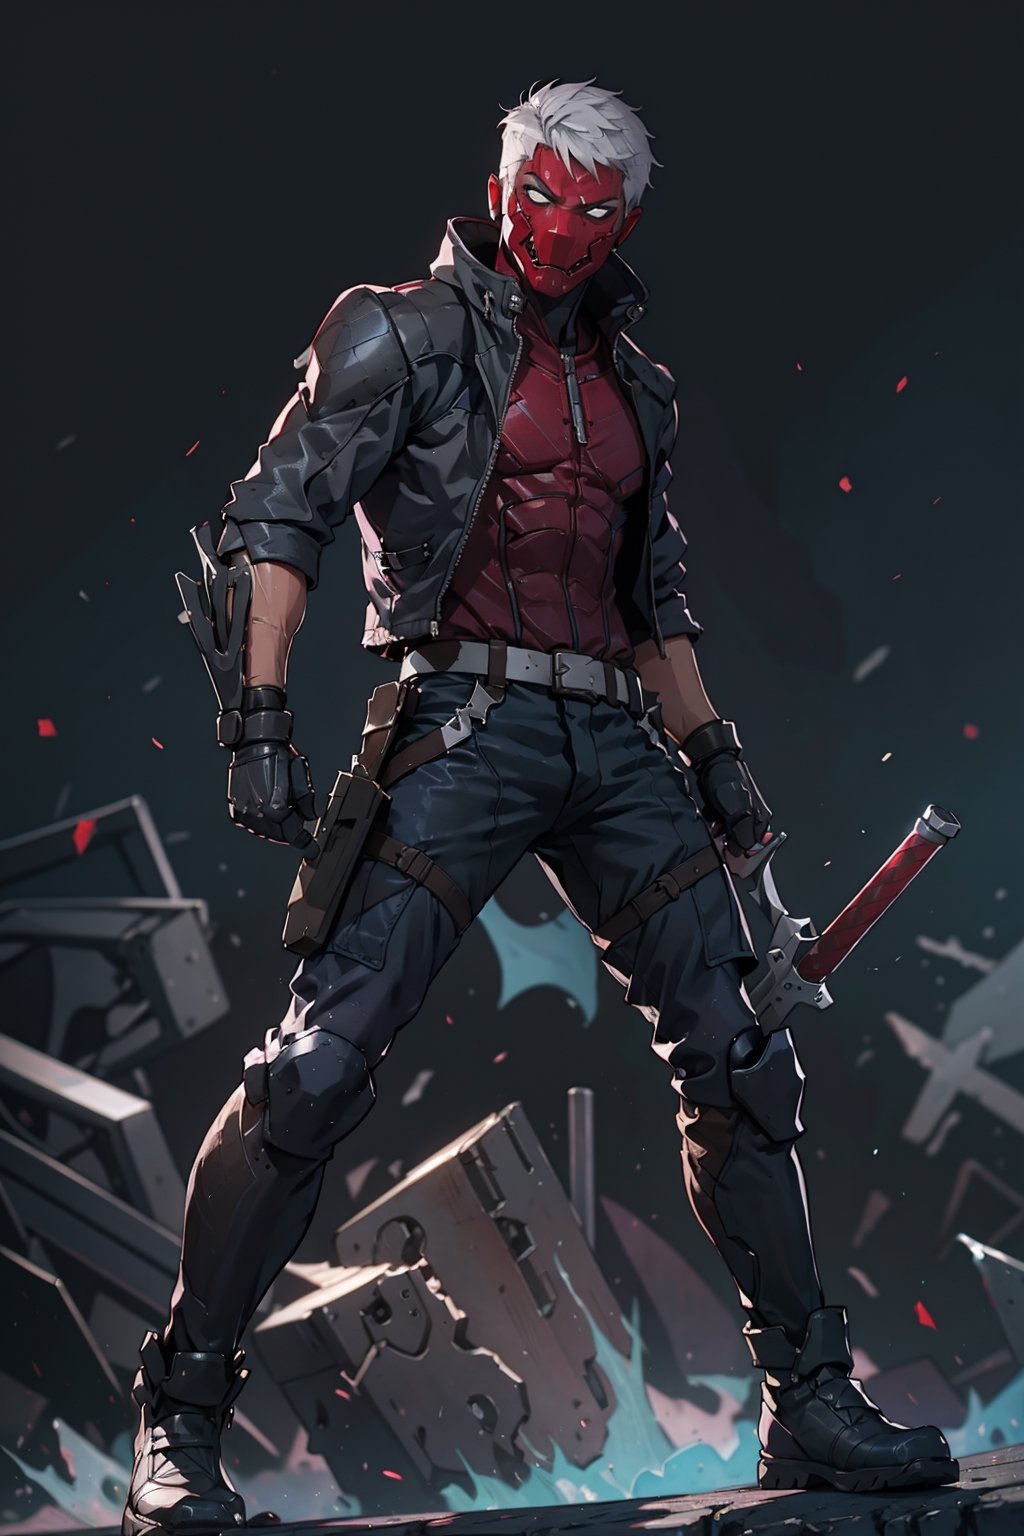 
an accurate and detailed full-body shot of a male superhero character named Wraith, tall and lean bulid, (Crimson half-mask), exposed cybernetic red eye, grafted cybernetic jawline, (Spiky white fringe hair), (choppy black undercut hair), Skintight black ninja-tech suit with crimson energized circuitry, (electric blue biker jacket), asymmetric collar, rolled sleeves, Gunmetal armor plates on shoulders, chest emblem, (Fitted burgundy leather moto-pants), (blue-gray armorized cargo panels), Knee guards, armored greaves, black combat boots, cyberized gunmetal strike gauntlet, Holsters, sheaths, tech-utility pouches, holding an obsidian high-frequency katana, masterpiece, high quality, 4K, raidenmgr, nero, rhdc, a man, red helment, brown leather jacket, gray skintight suit, gloves, belt, boots,red helmet